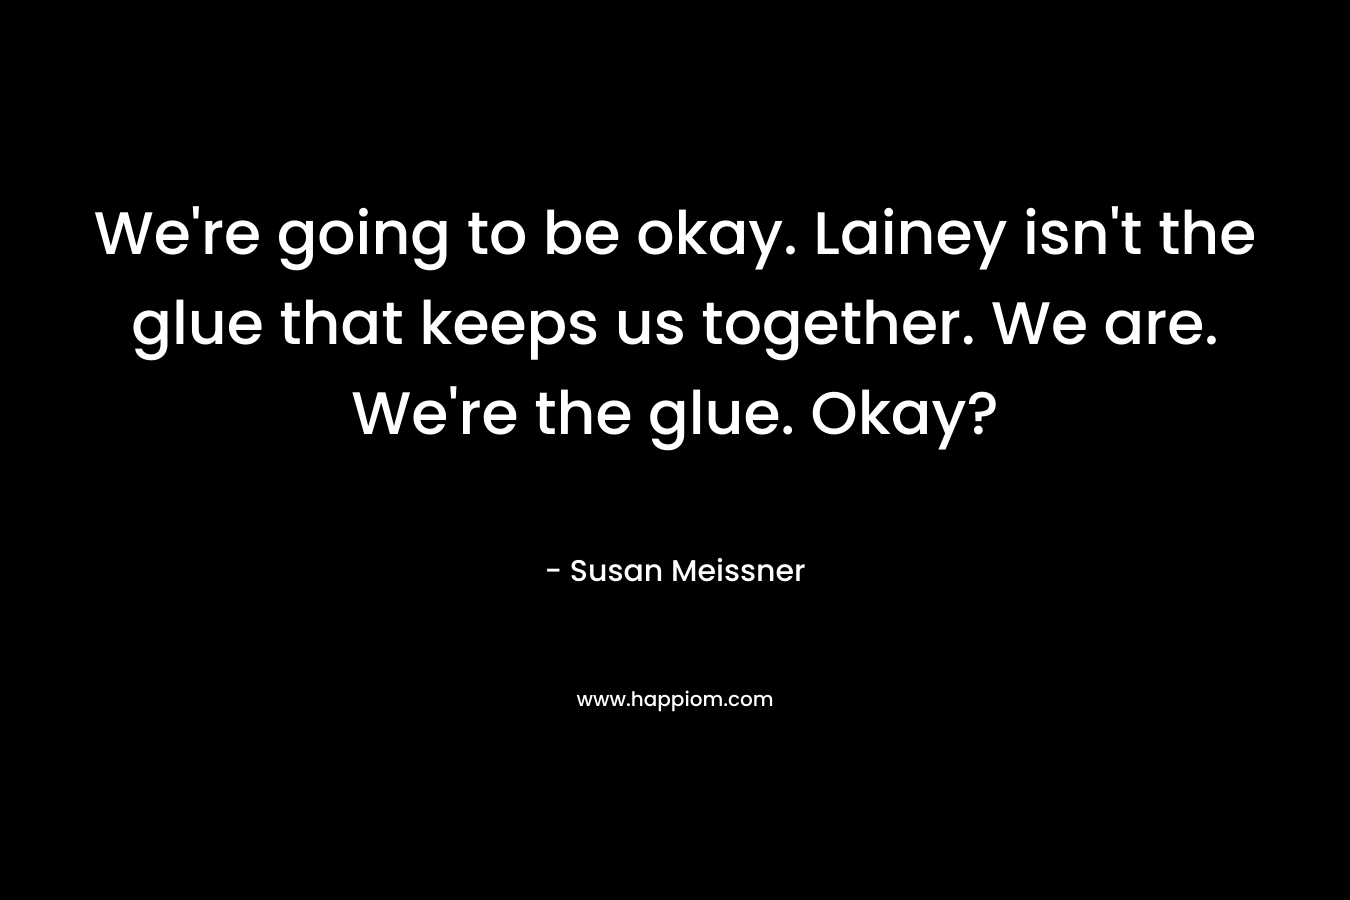 We’re going to be okay. Lainey isn’t the glue that keeps us together. We are. We’re the glue. Okay? – Susan Meissner